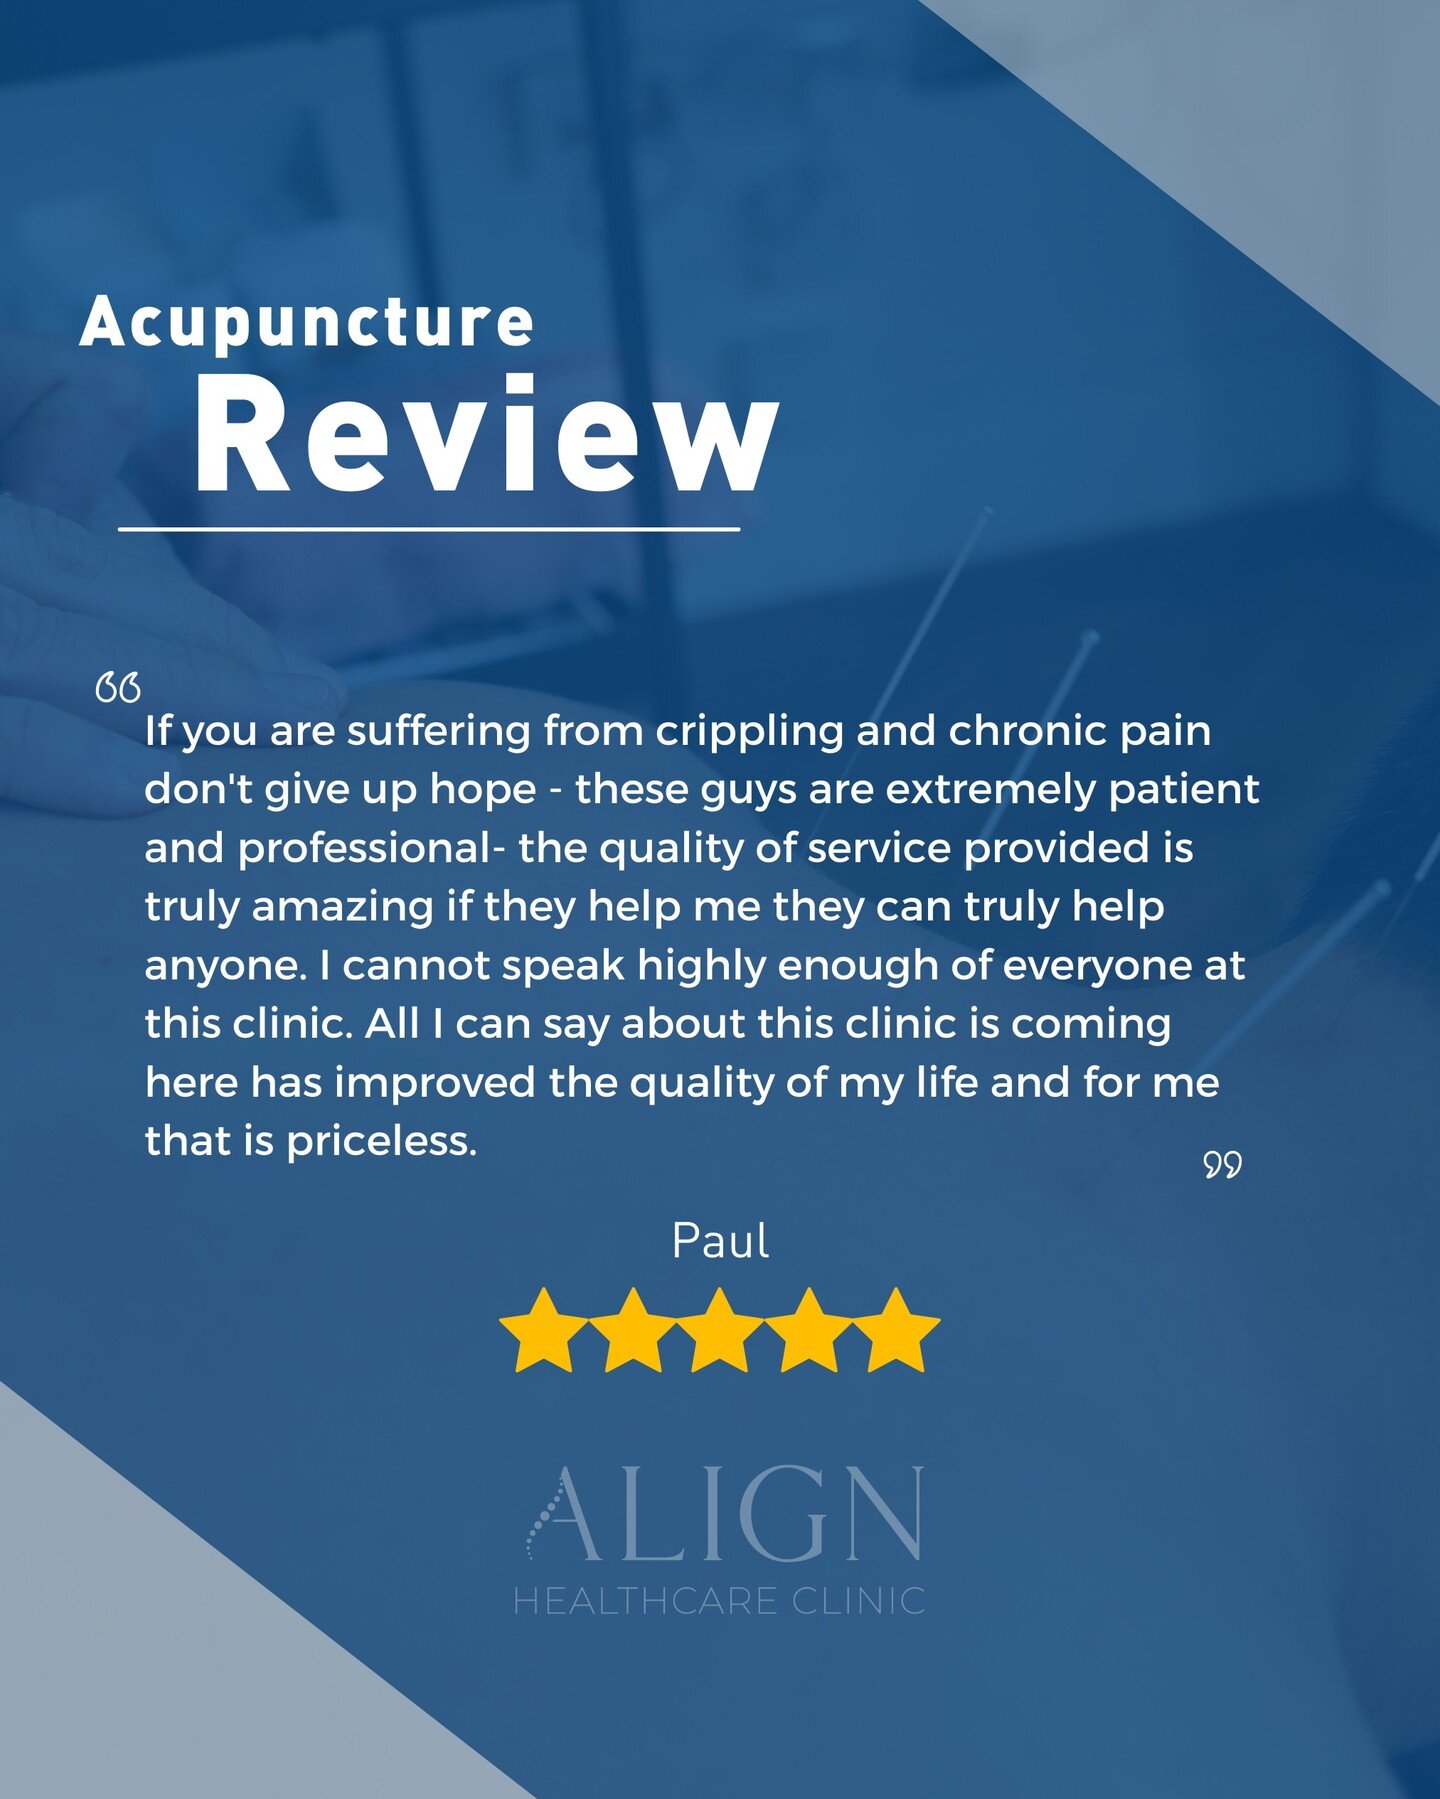 ⭐️ Acupuncture Review ⭐️

Swipe for more information!

📍15 Merton Road, Bootle, L20 3BG.
🌍www.AlignHealthcareClinic.co.uk
📞 0151 203 2884

#bootlehealthcare #liverpoolhealthcare #healthcareclinic #wellnessclinic
#AlignHealthcareClinic #holistichea